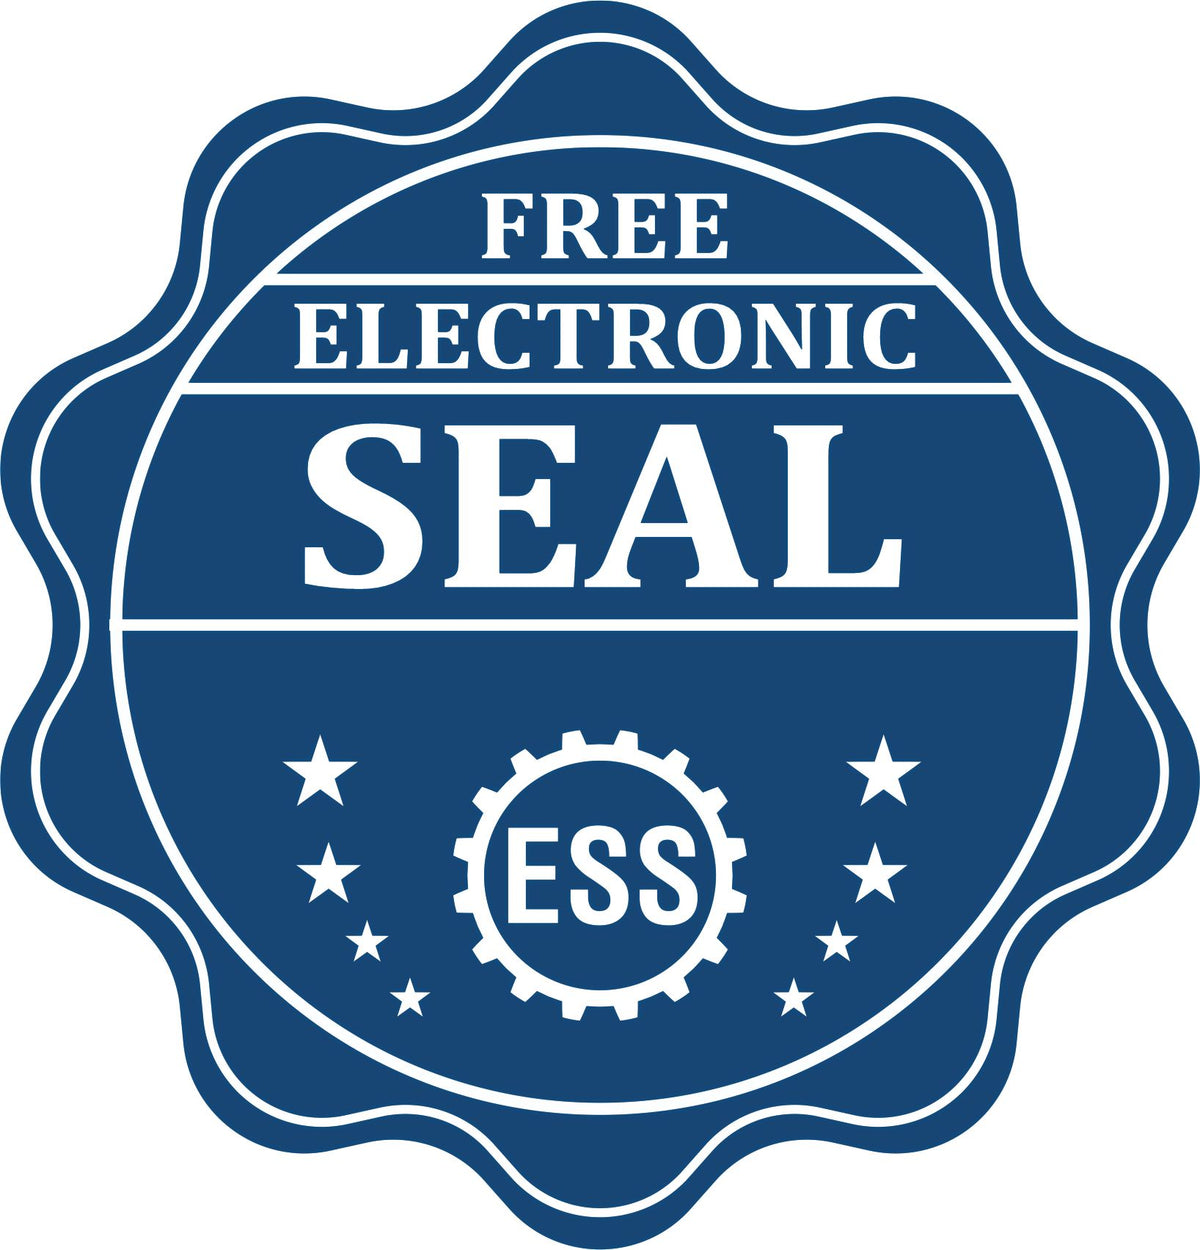 A badge showing a free electronic seal for the Long Reach Alabama PE Seal with stars and the ESS gear on the emblem.